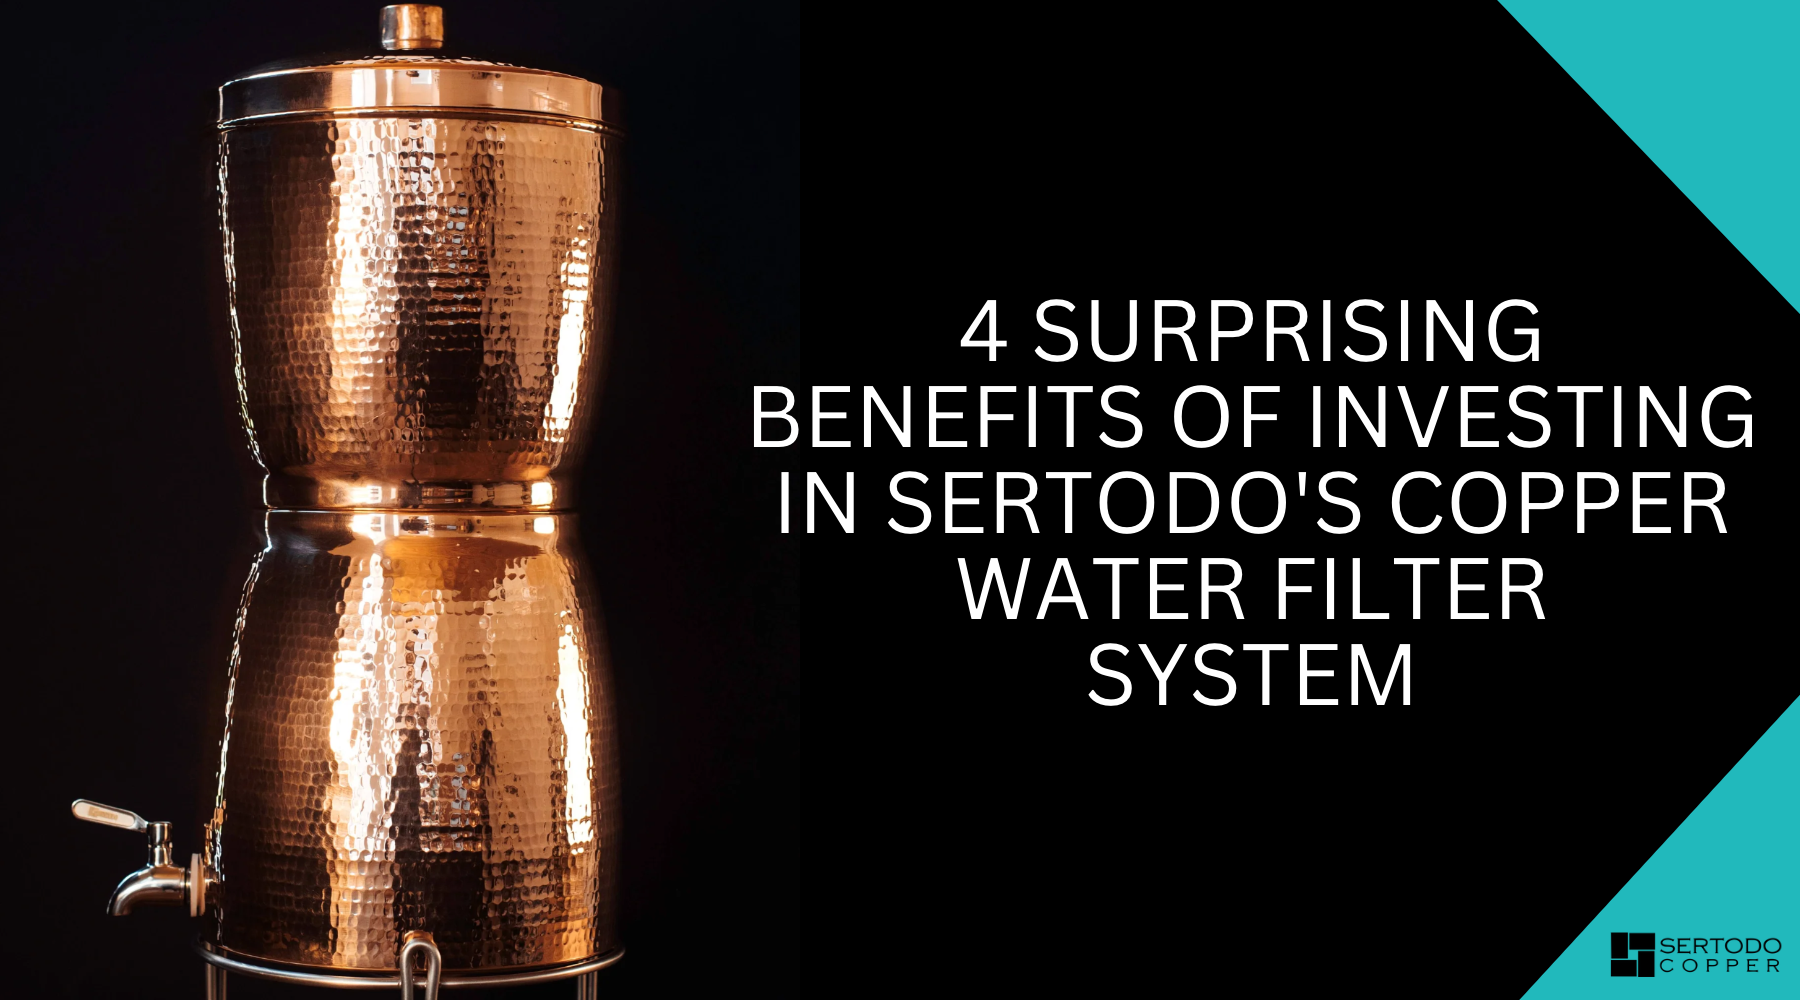 Sertodo Copper Water Filter System Benefits More Than Your Health